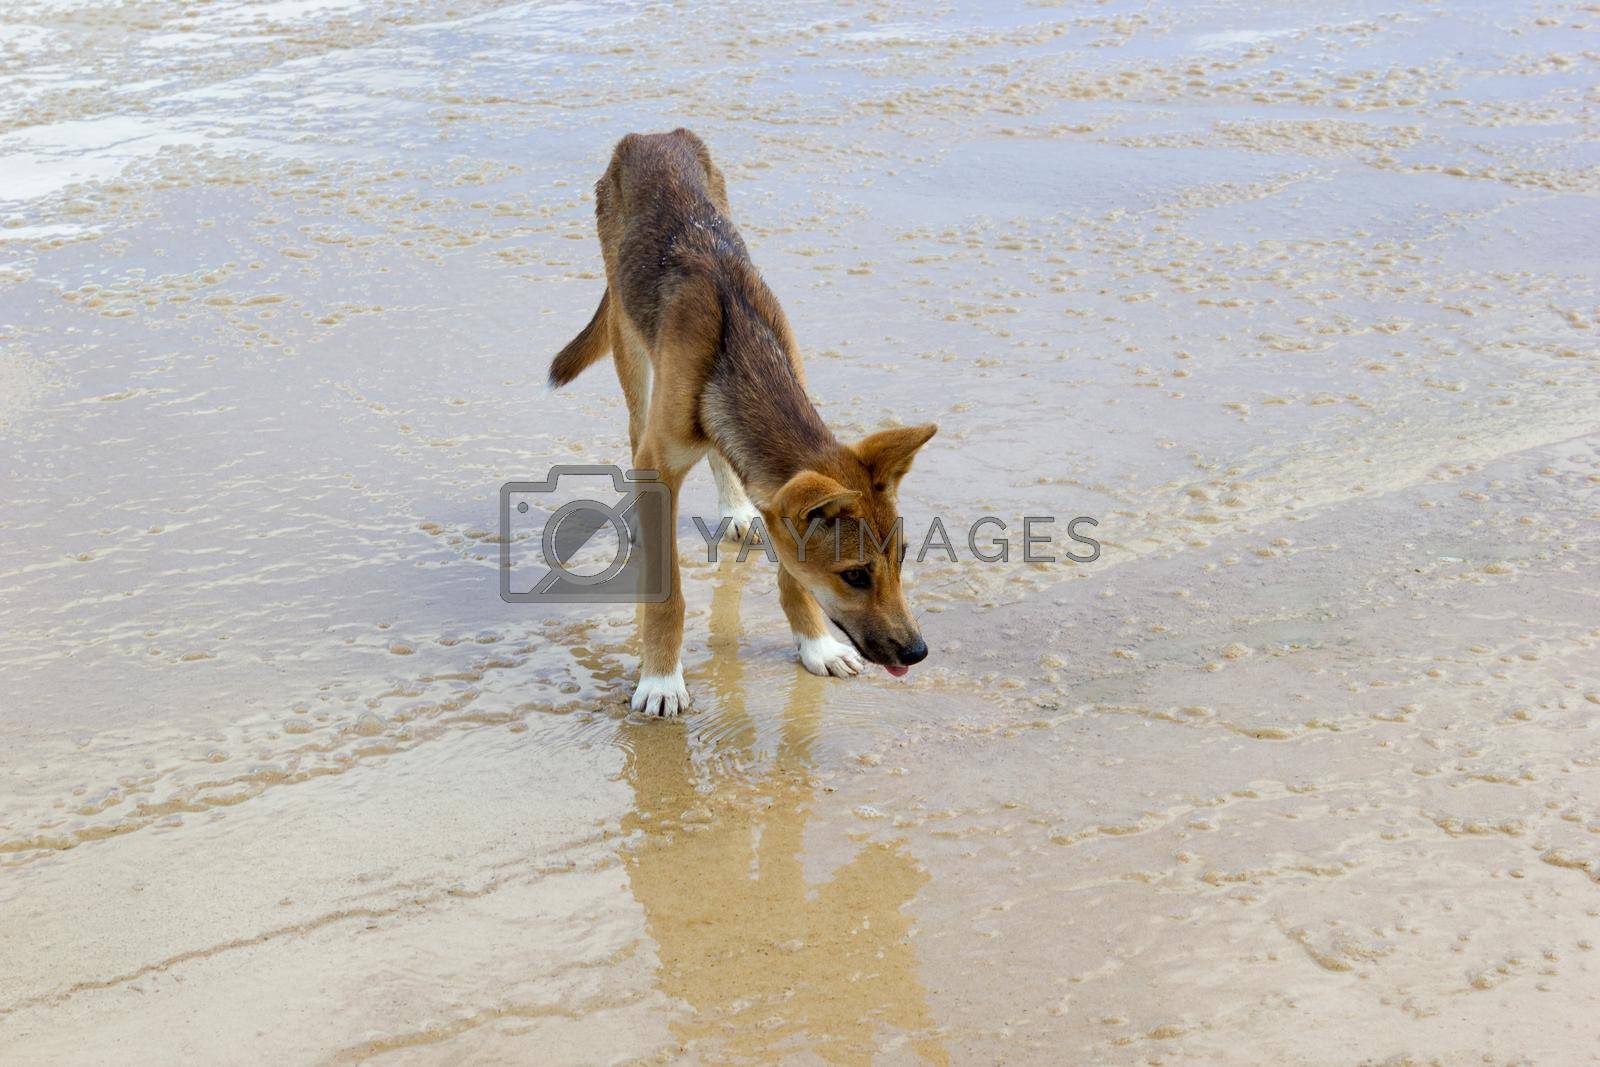 Royalty free image of Dingo on the beach in Great Sandy National Park, Fraser Island Waddy Point, QLD, Australia by bettercallcurry